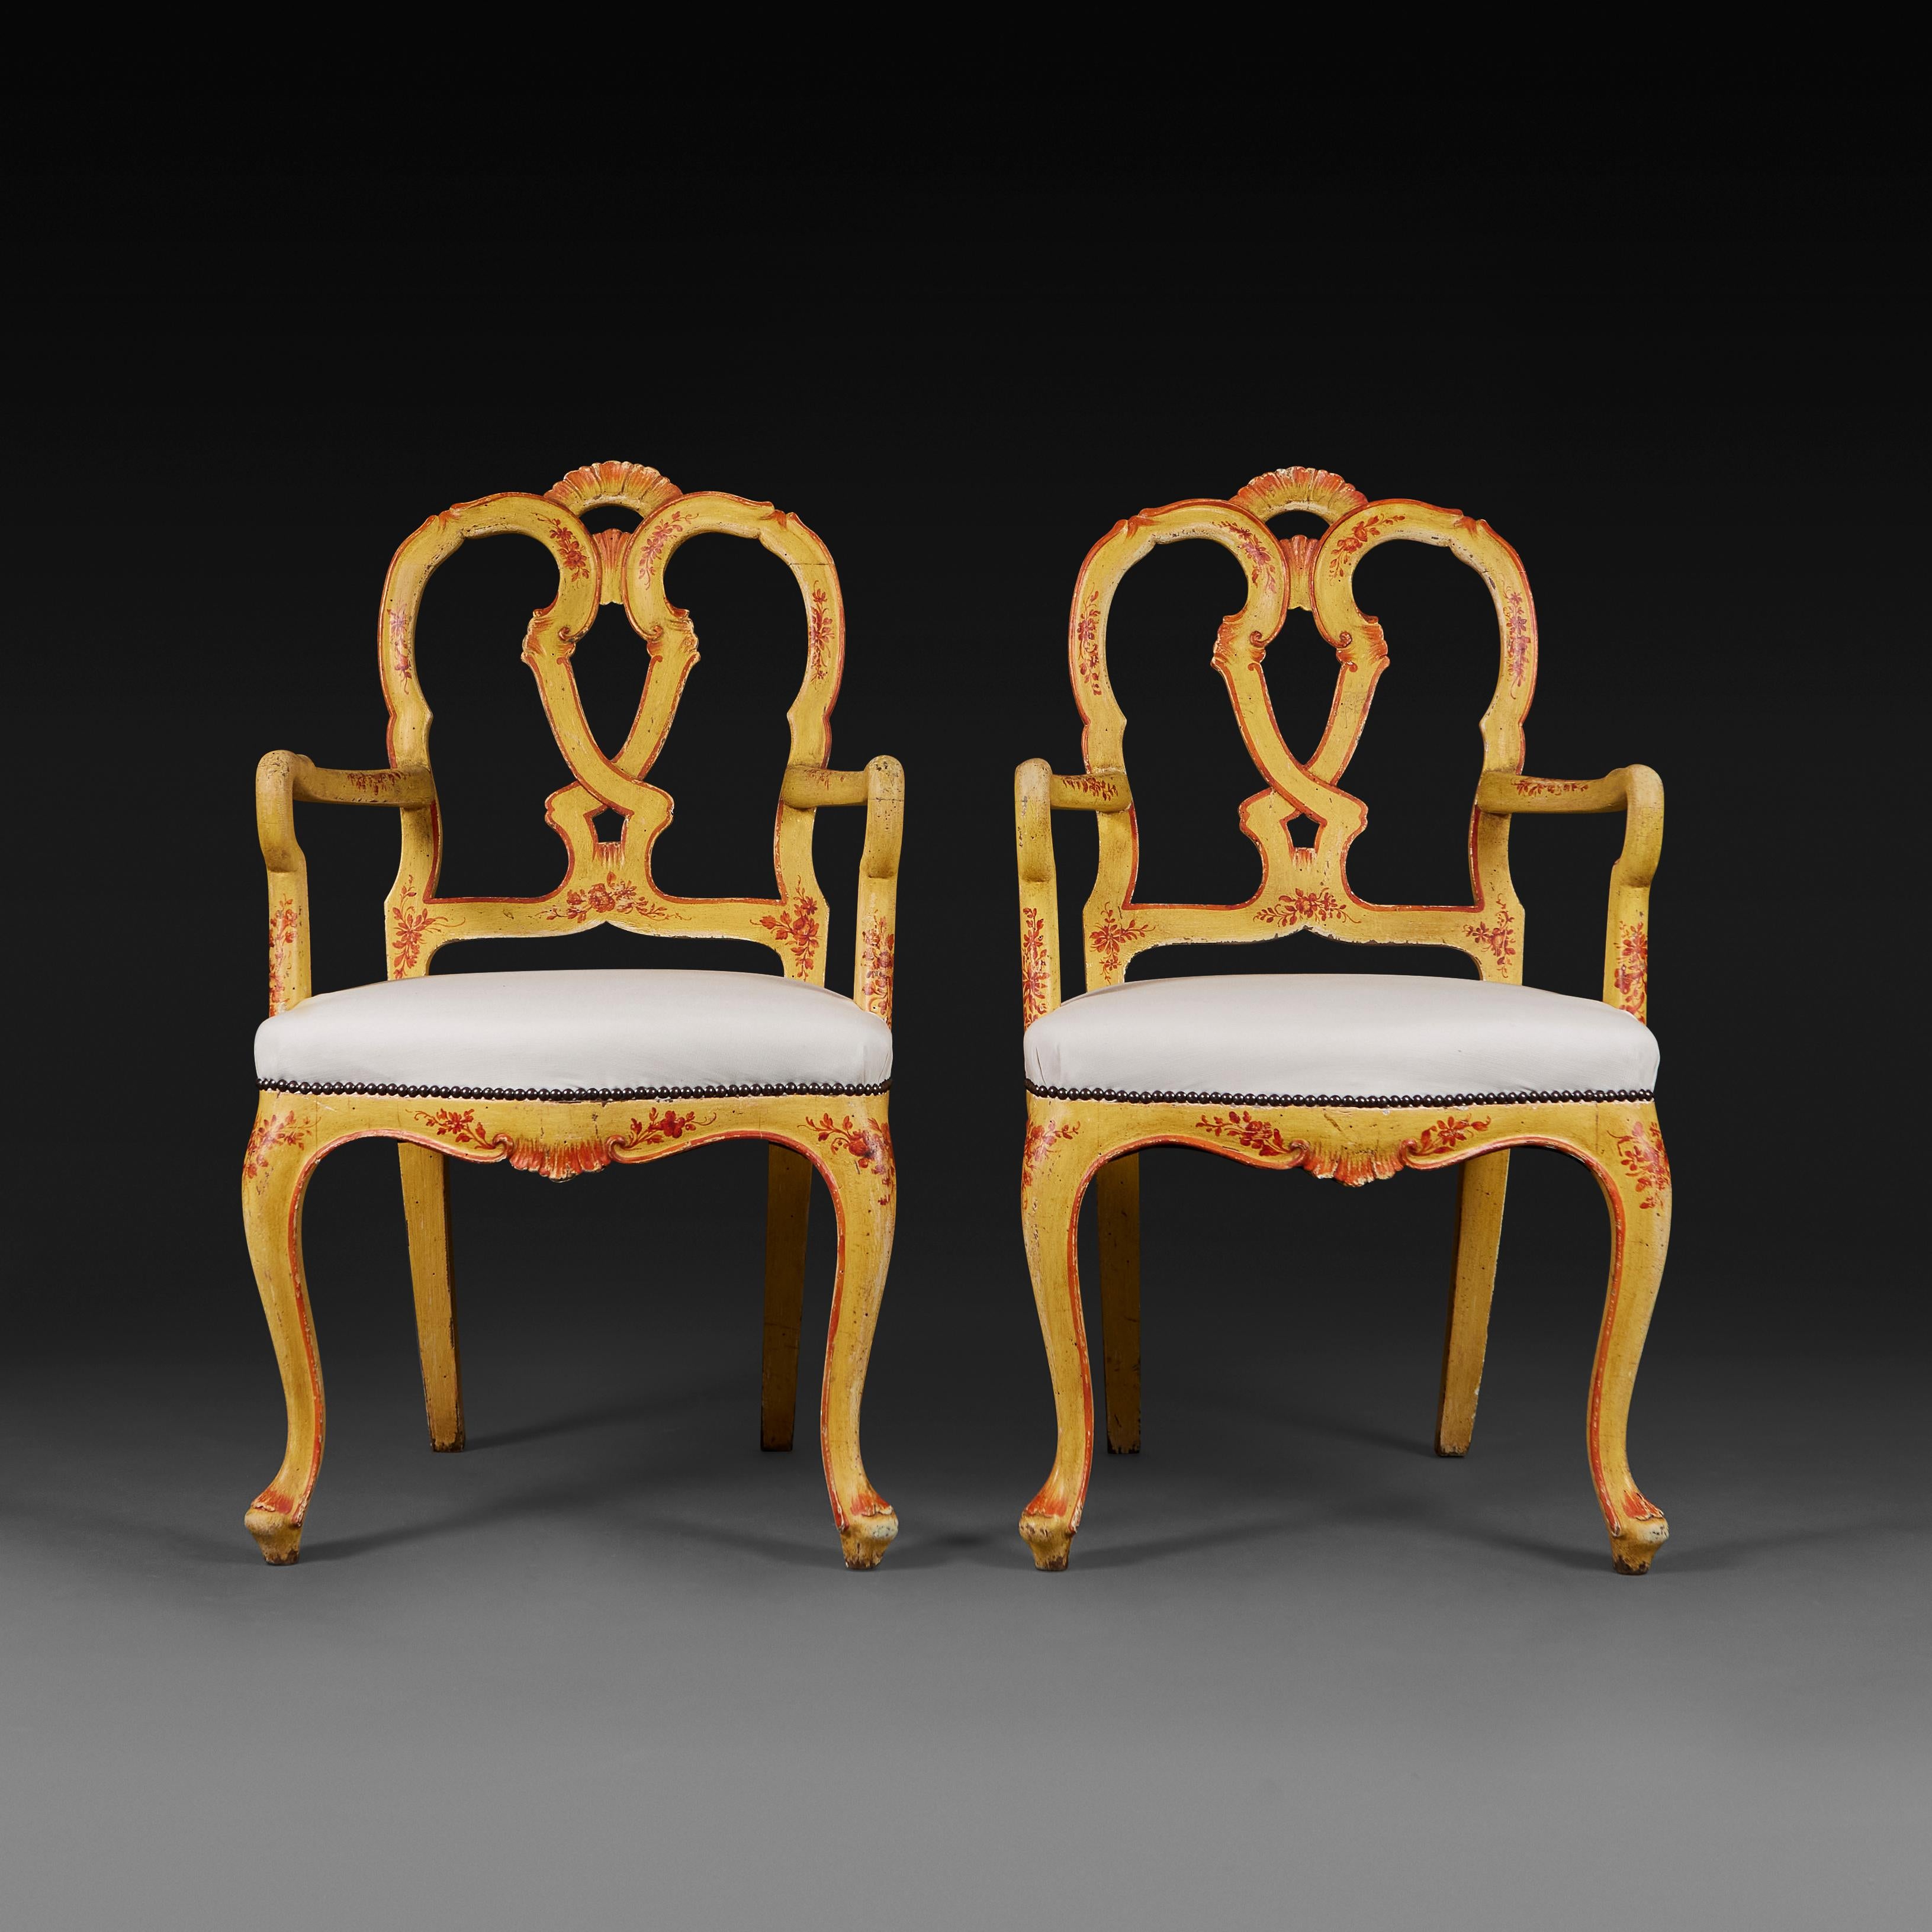 Italian A Pair of 19th Century Painted Venetian Armchairs For Sale